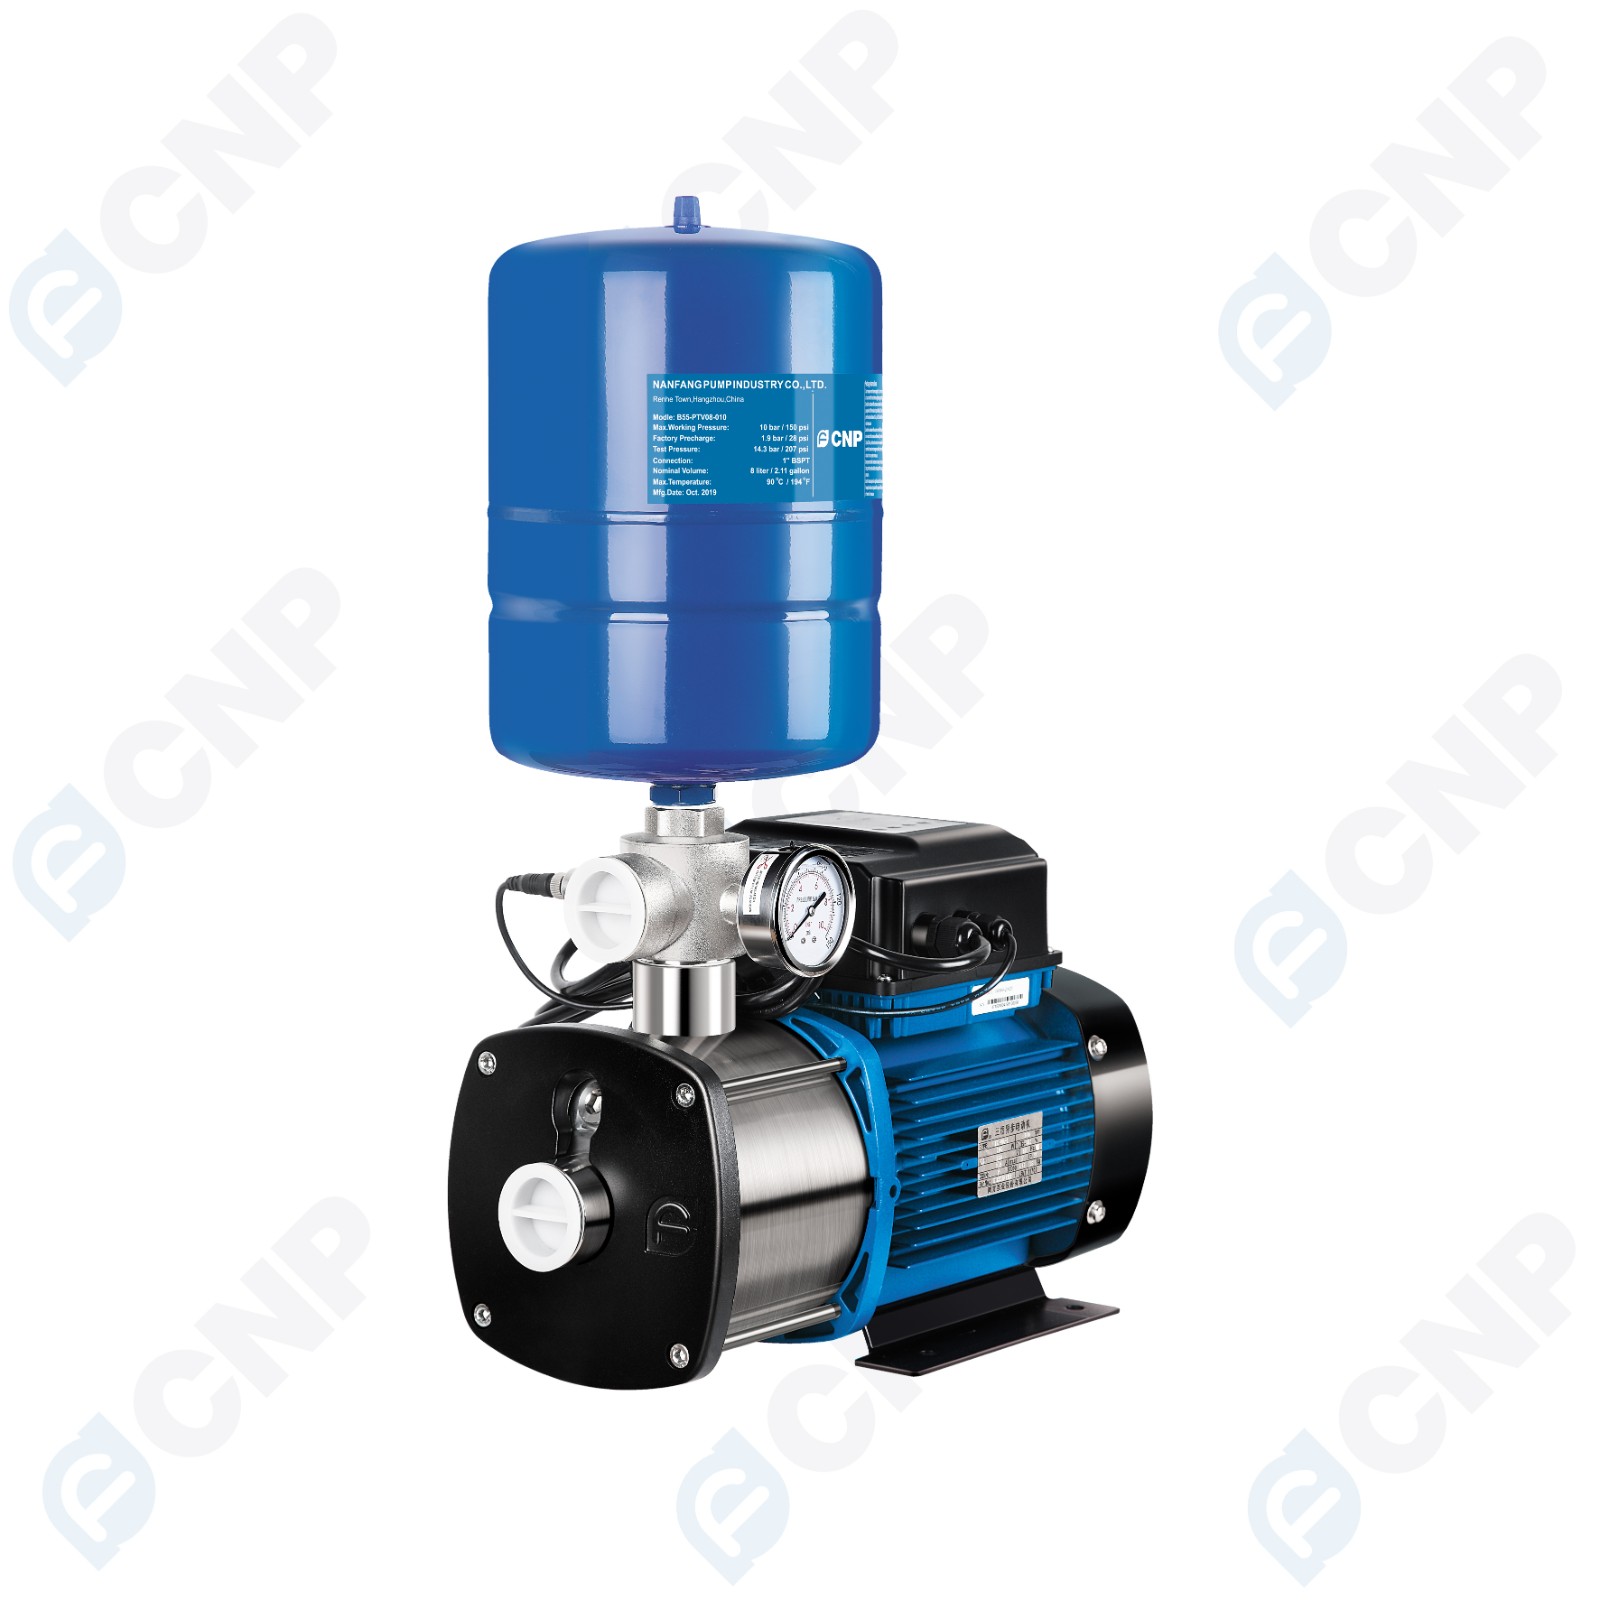 CHME Intelligent Frequency Variable Pump